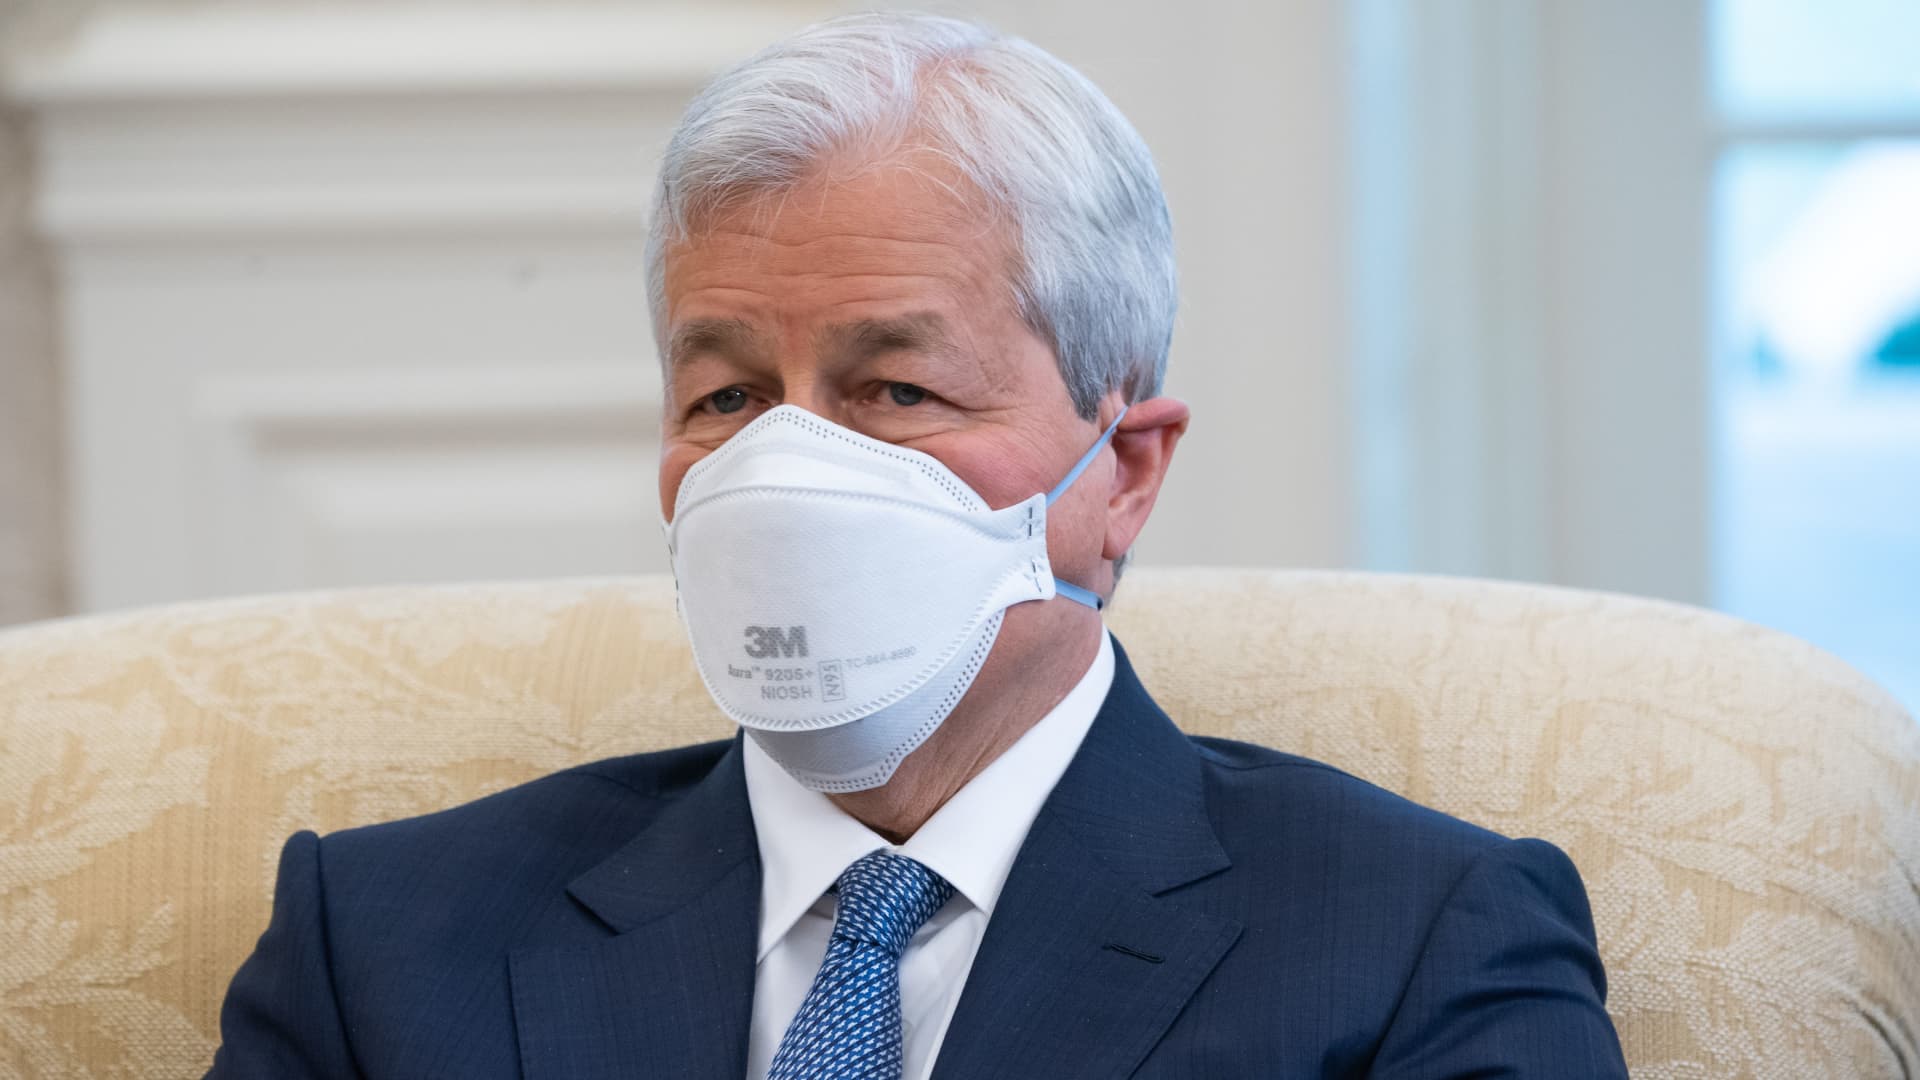 Jamie Dimon, Chairman and CEO of JPMorgan Chase, attends a meeting hosted by US President Joe Biden with business leaders about a Covid-19 relief bill in the Oval Office of the White House in Washington, DC, February 9, 2021.